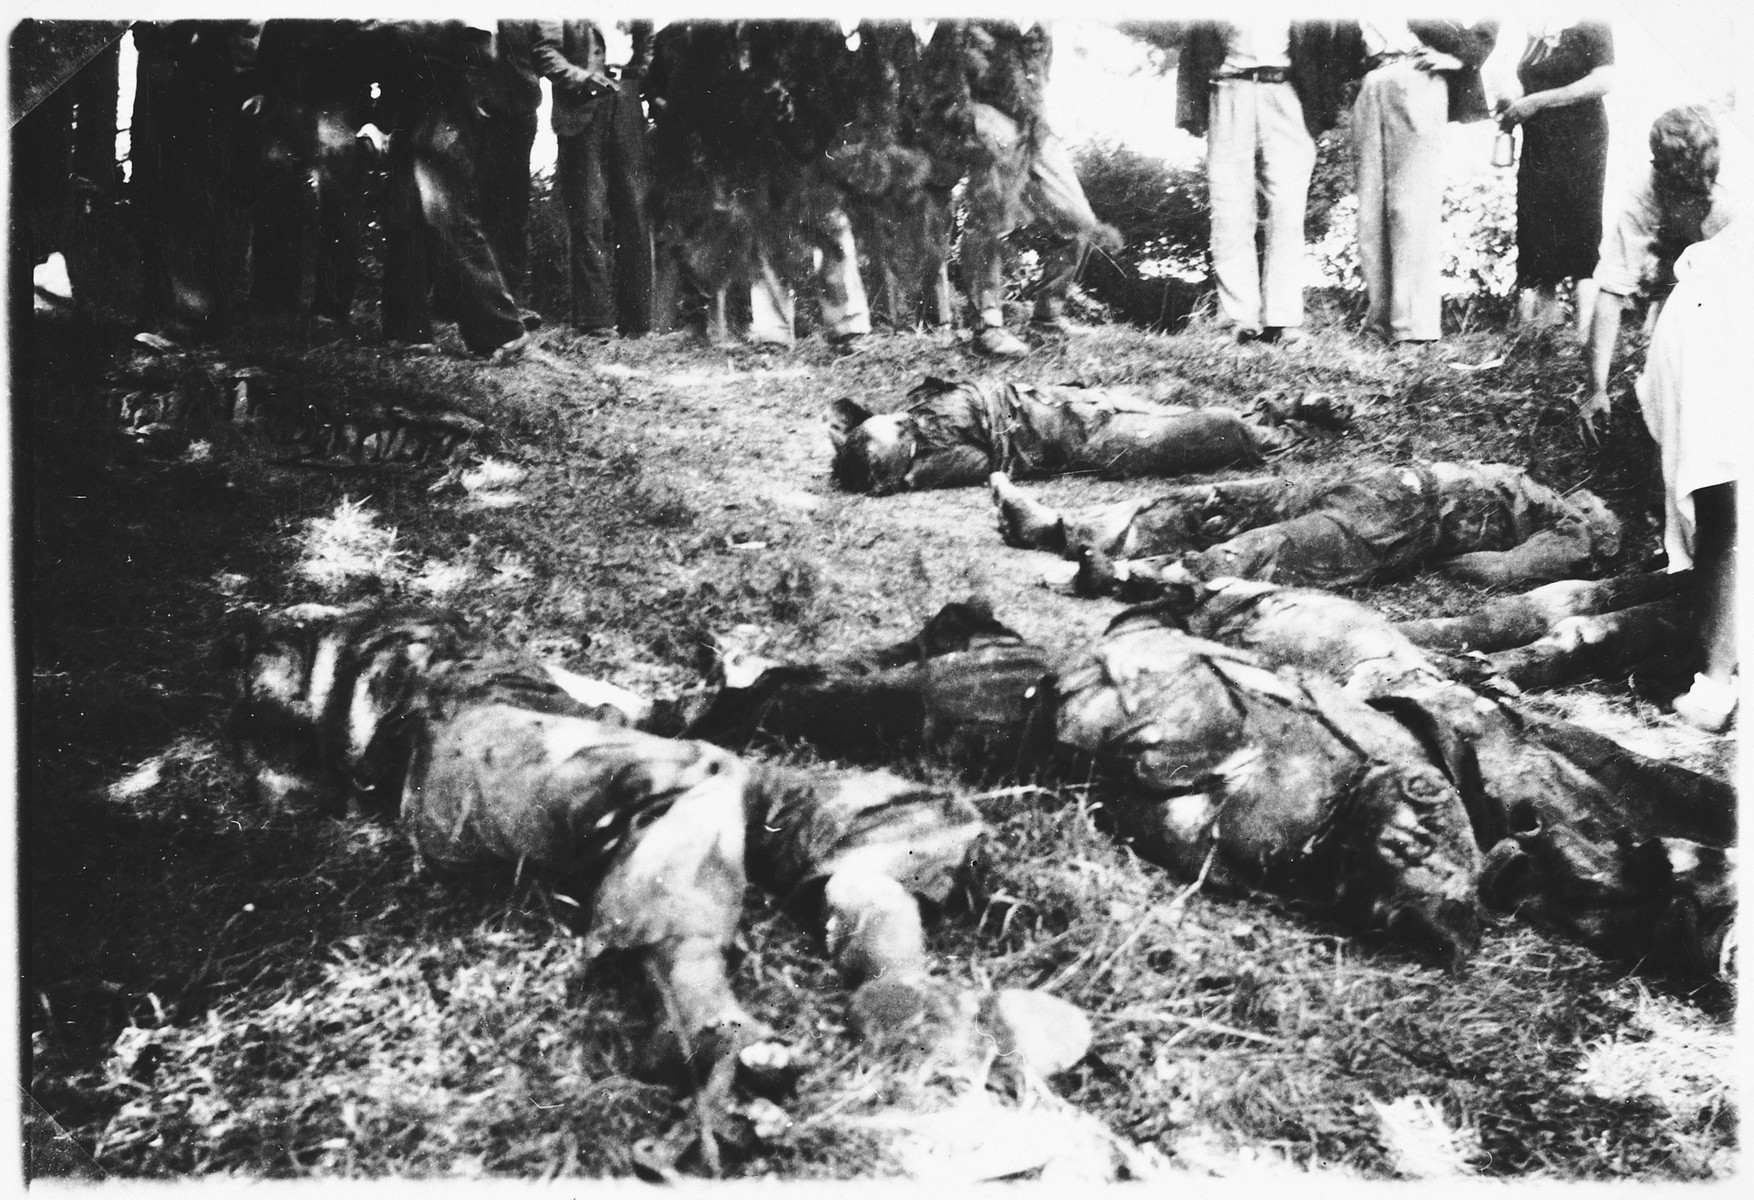 French civilians look at the bodies of fellow townspeople killed by Wehrmacht troopers in St. Pol-de-Leon.